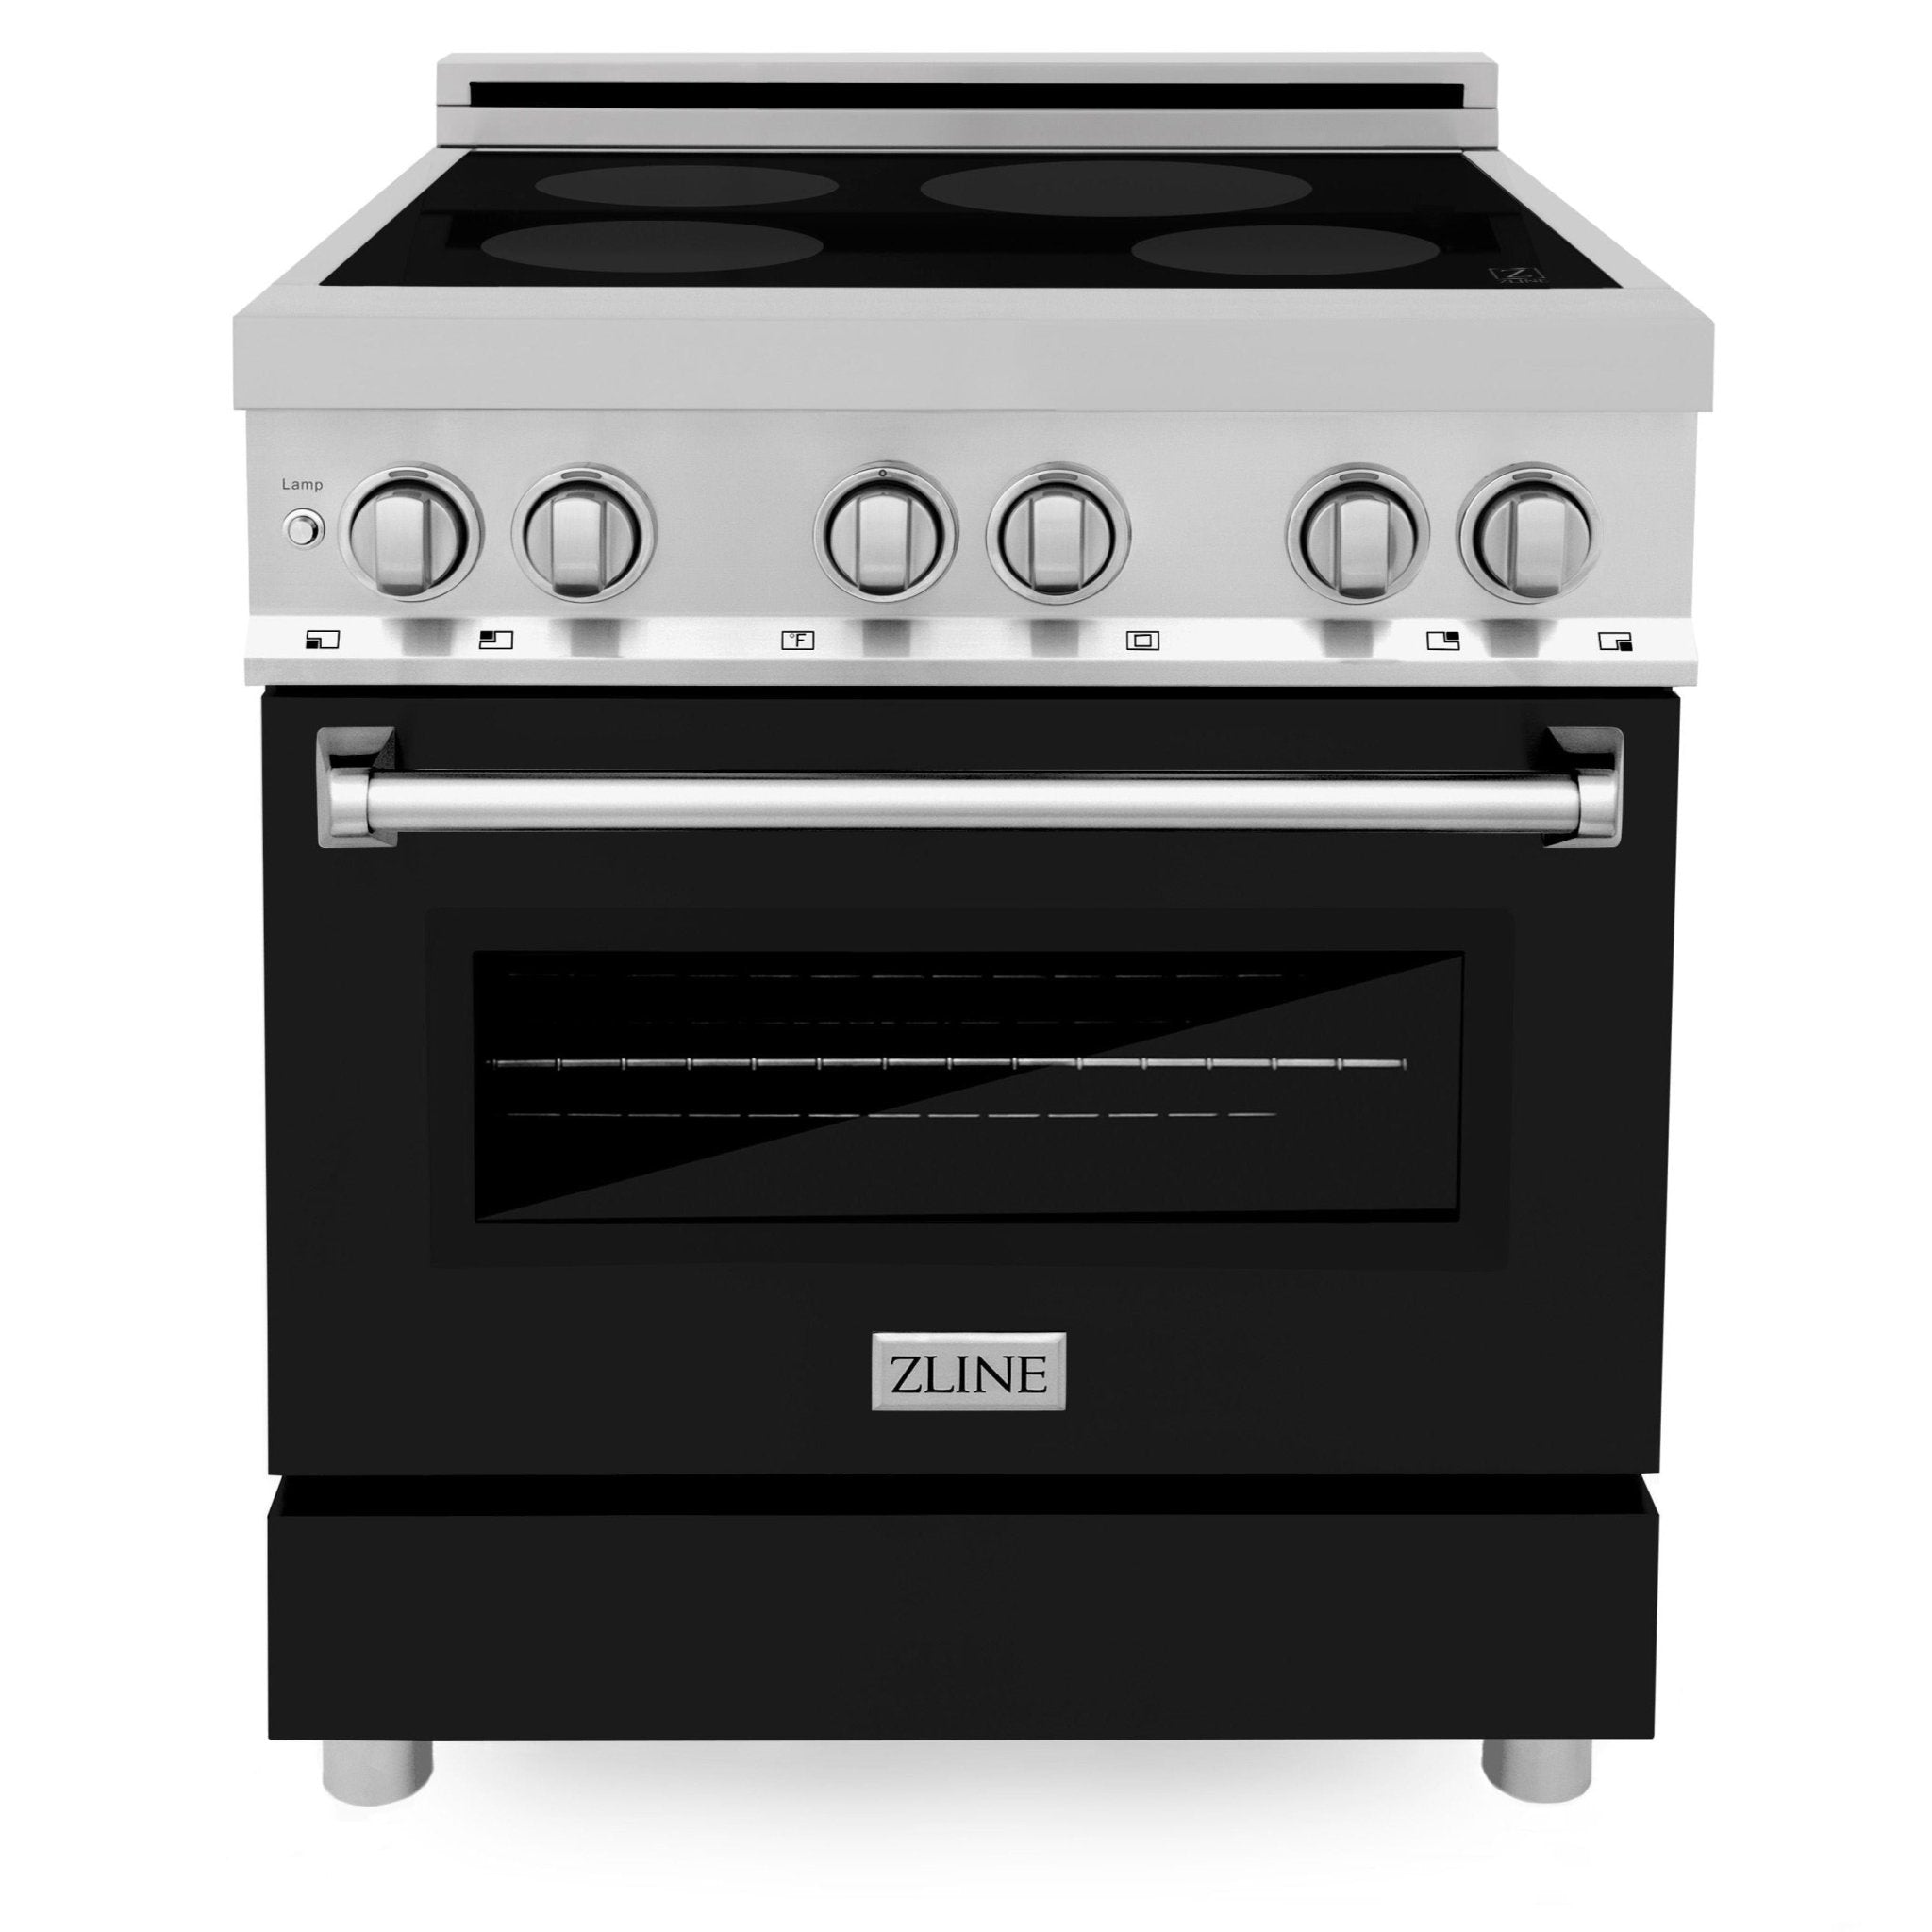 ZLINE 30 In. 4.0 cu. ft. Induction Range with a 4 Element Stove and Electric Oven in Stainless Steel, RAIND-30 - Smart Kitchen Lab